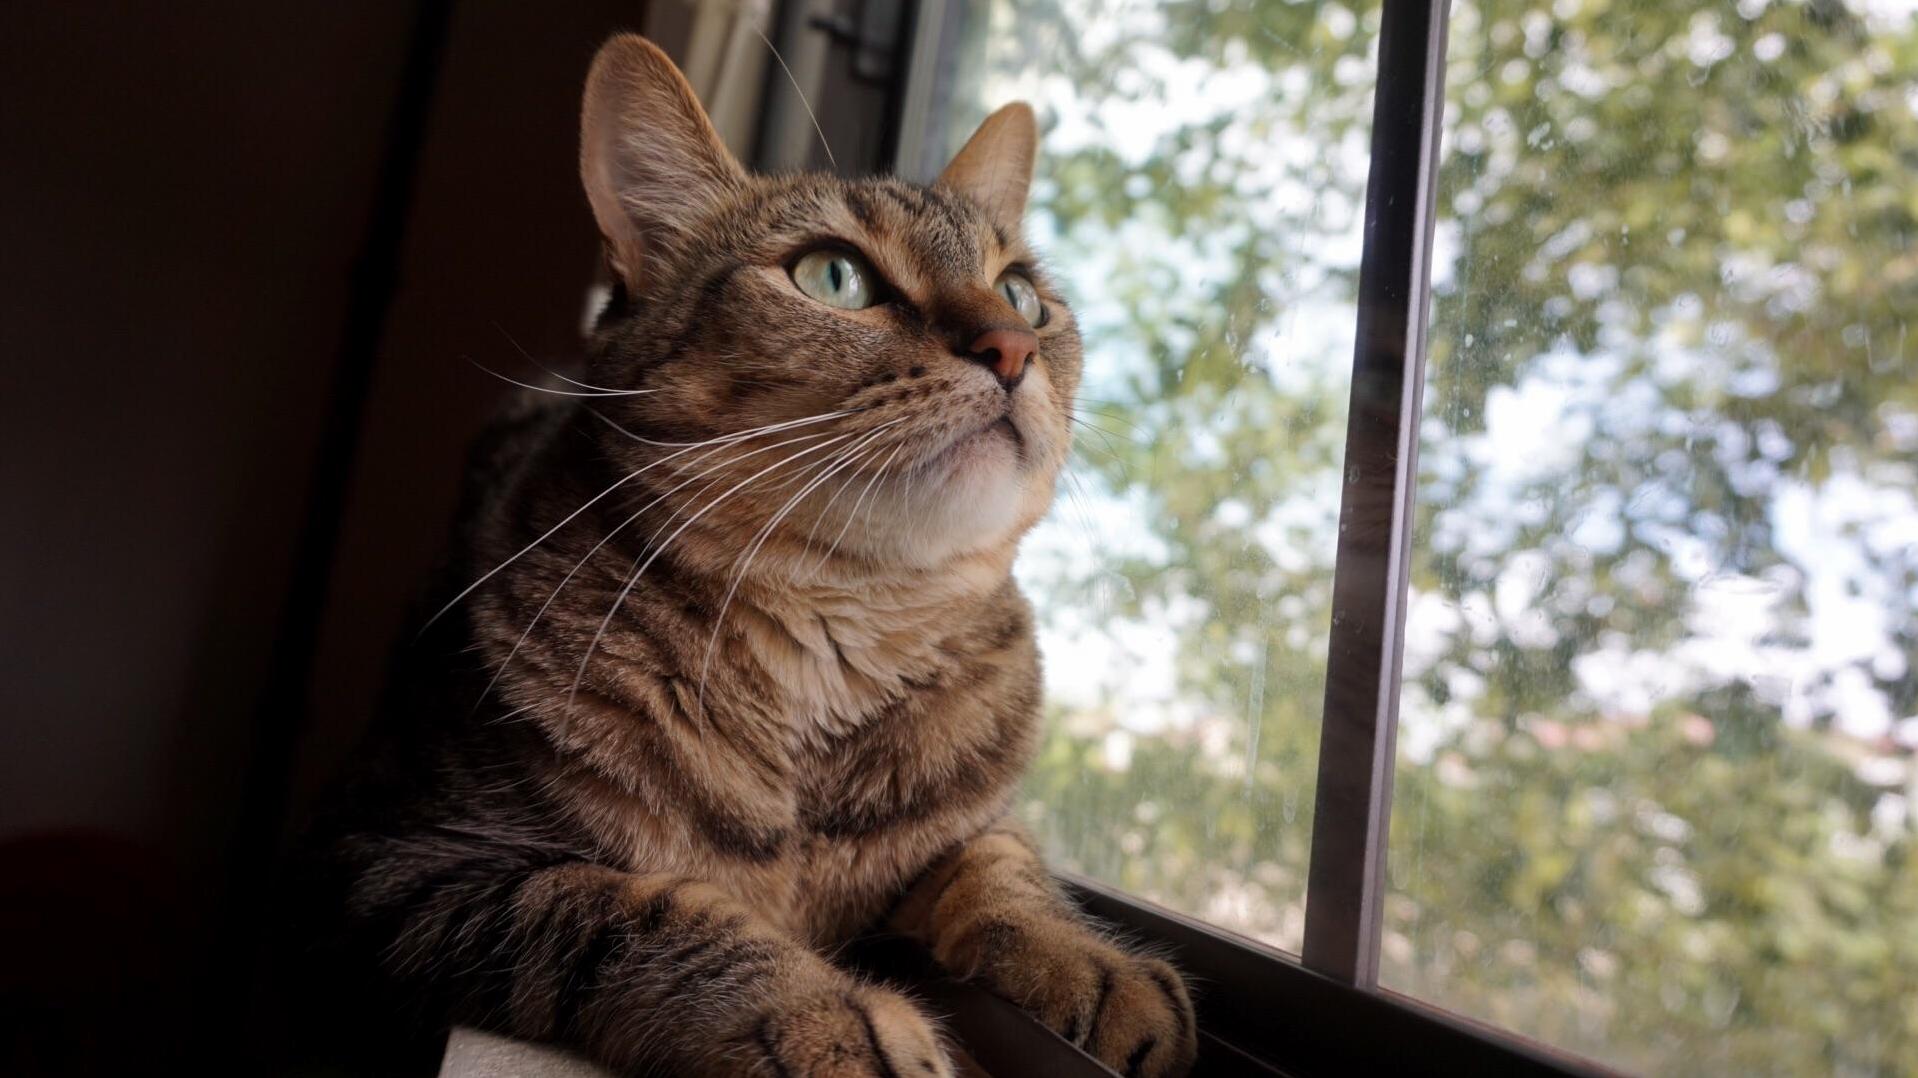 Caught this guy eyeballing a bird in the tree from the windowsill.